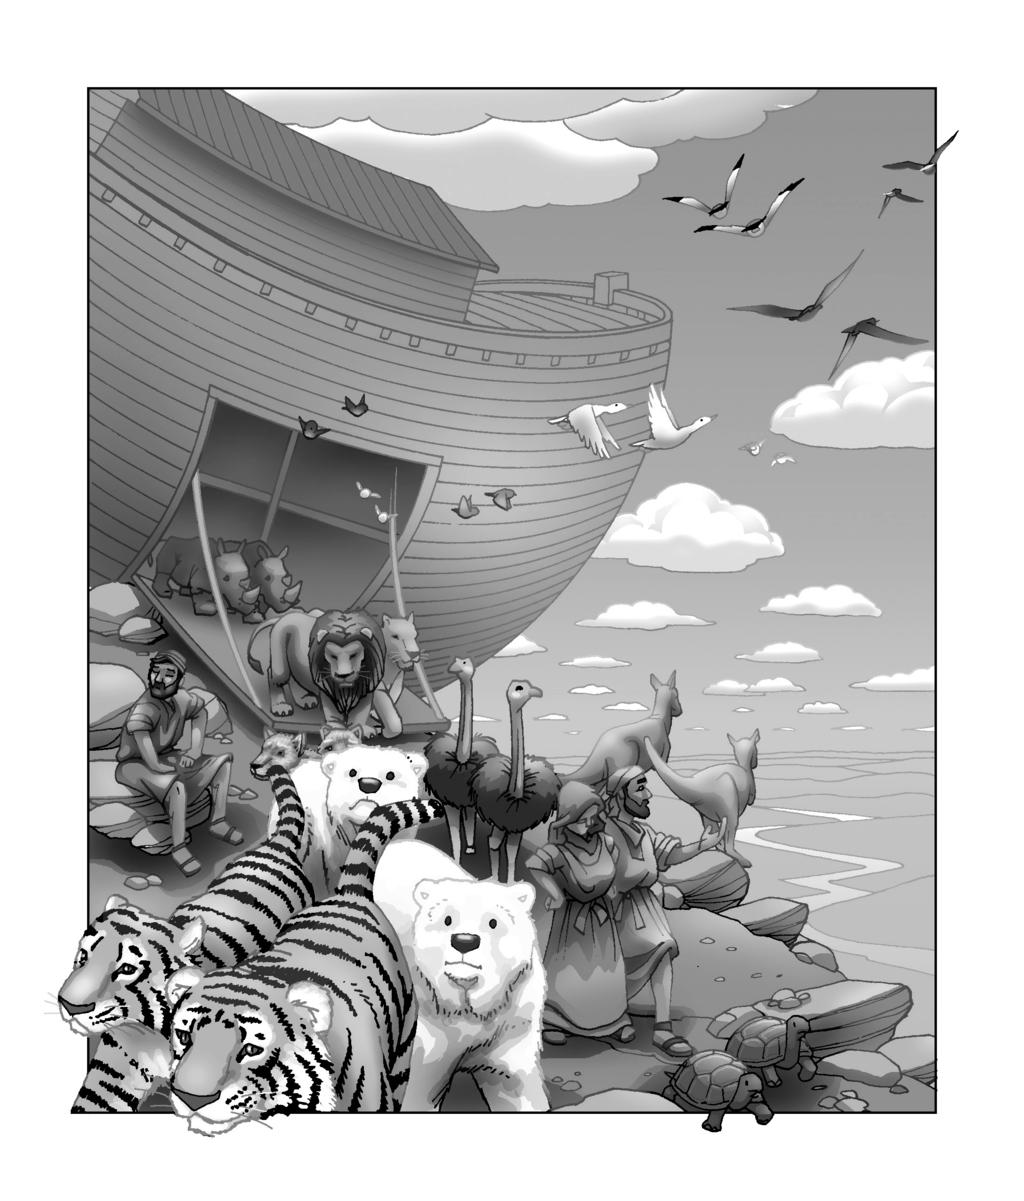 Noah and his family saw the very first rainbow God made. Do you know why? Noah and his family had been living in the ark for a whole year, and they were, most likely, eager to get out.